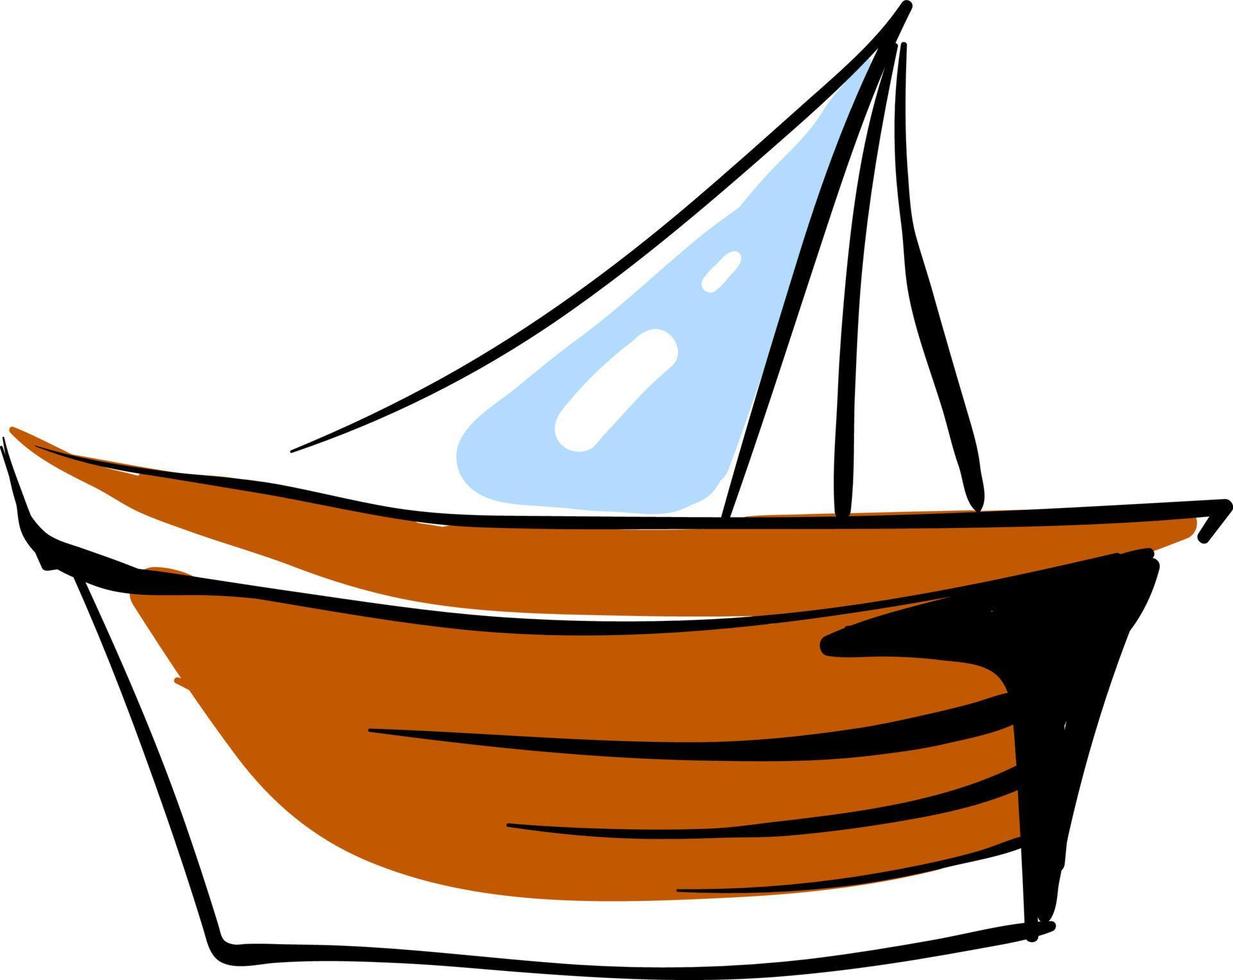 Small wooden boat, illustration, vector on white background.